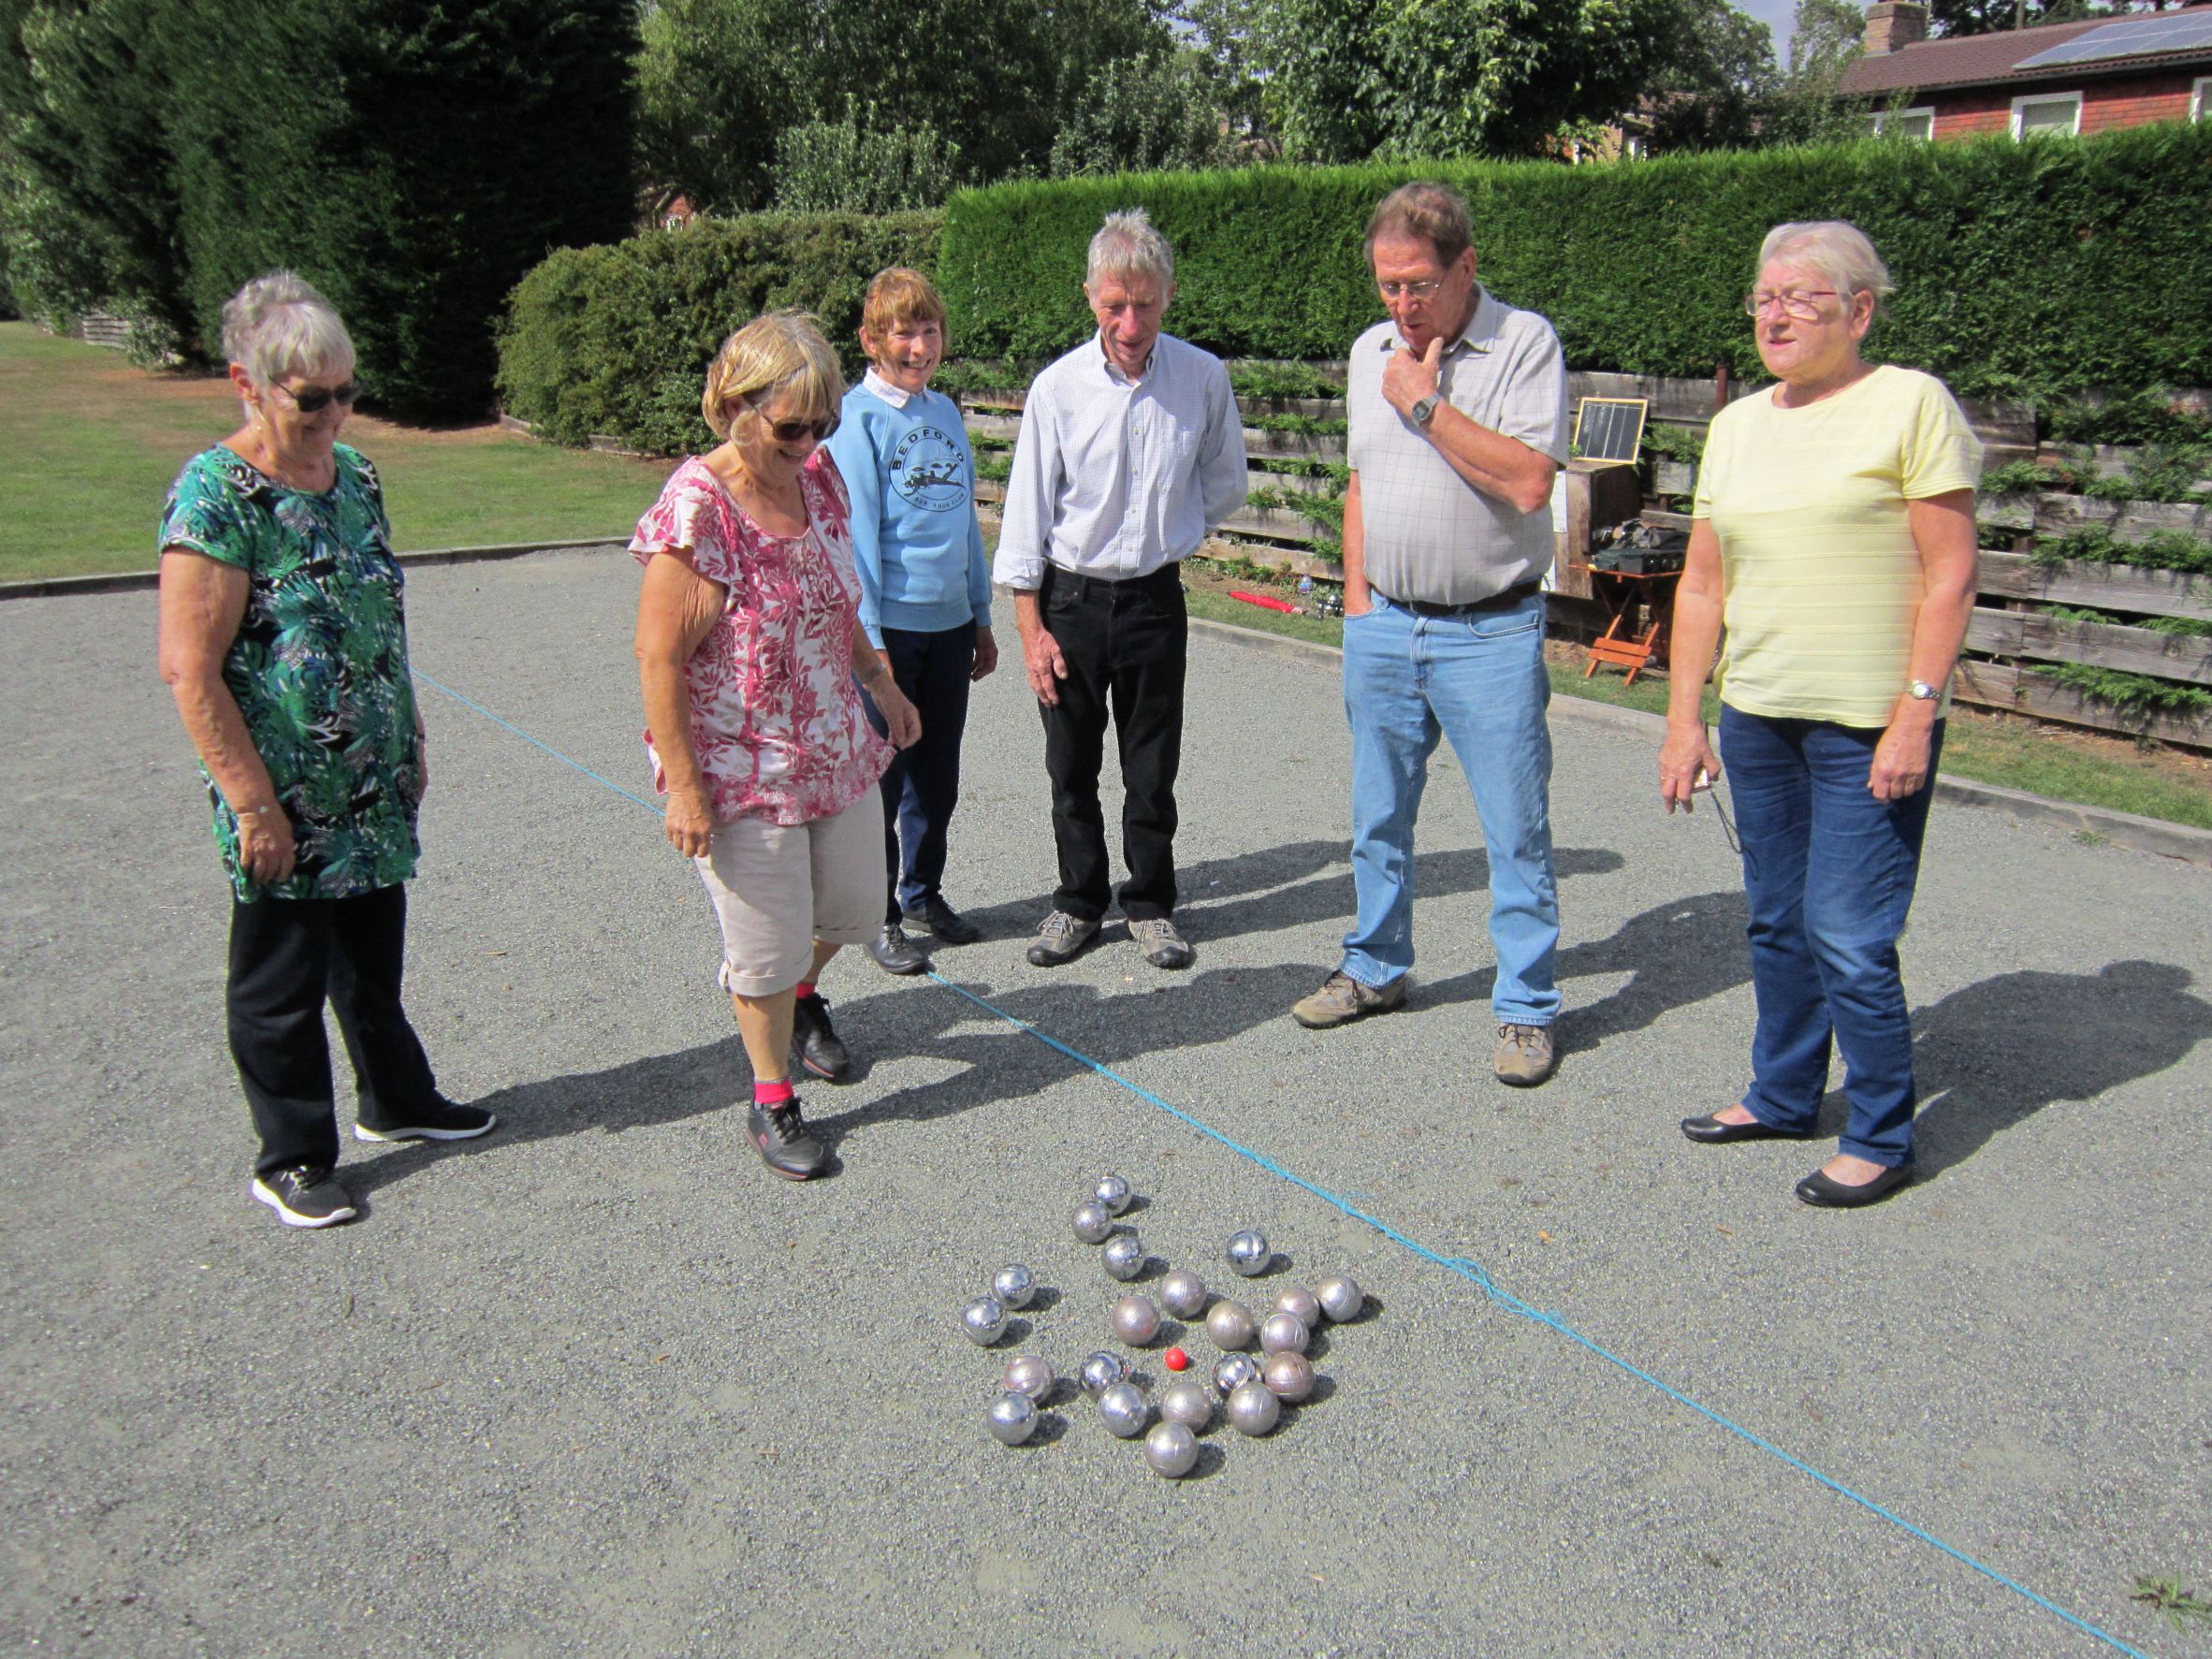 Some members of the Petanque Group